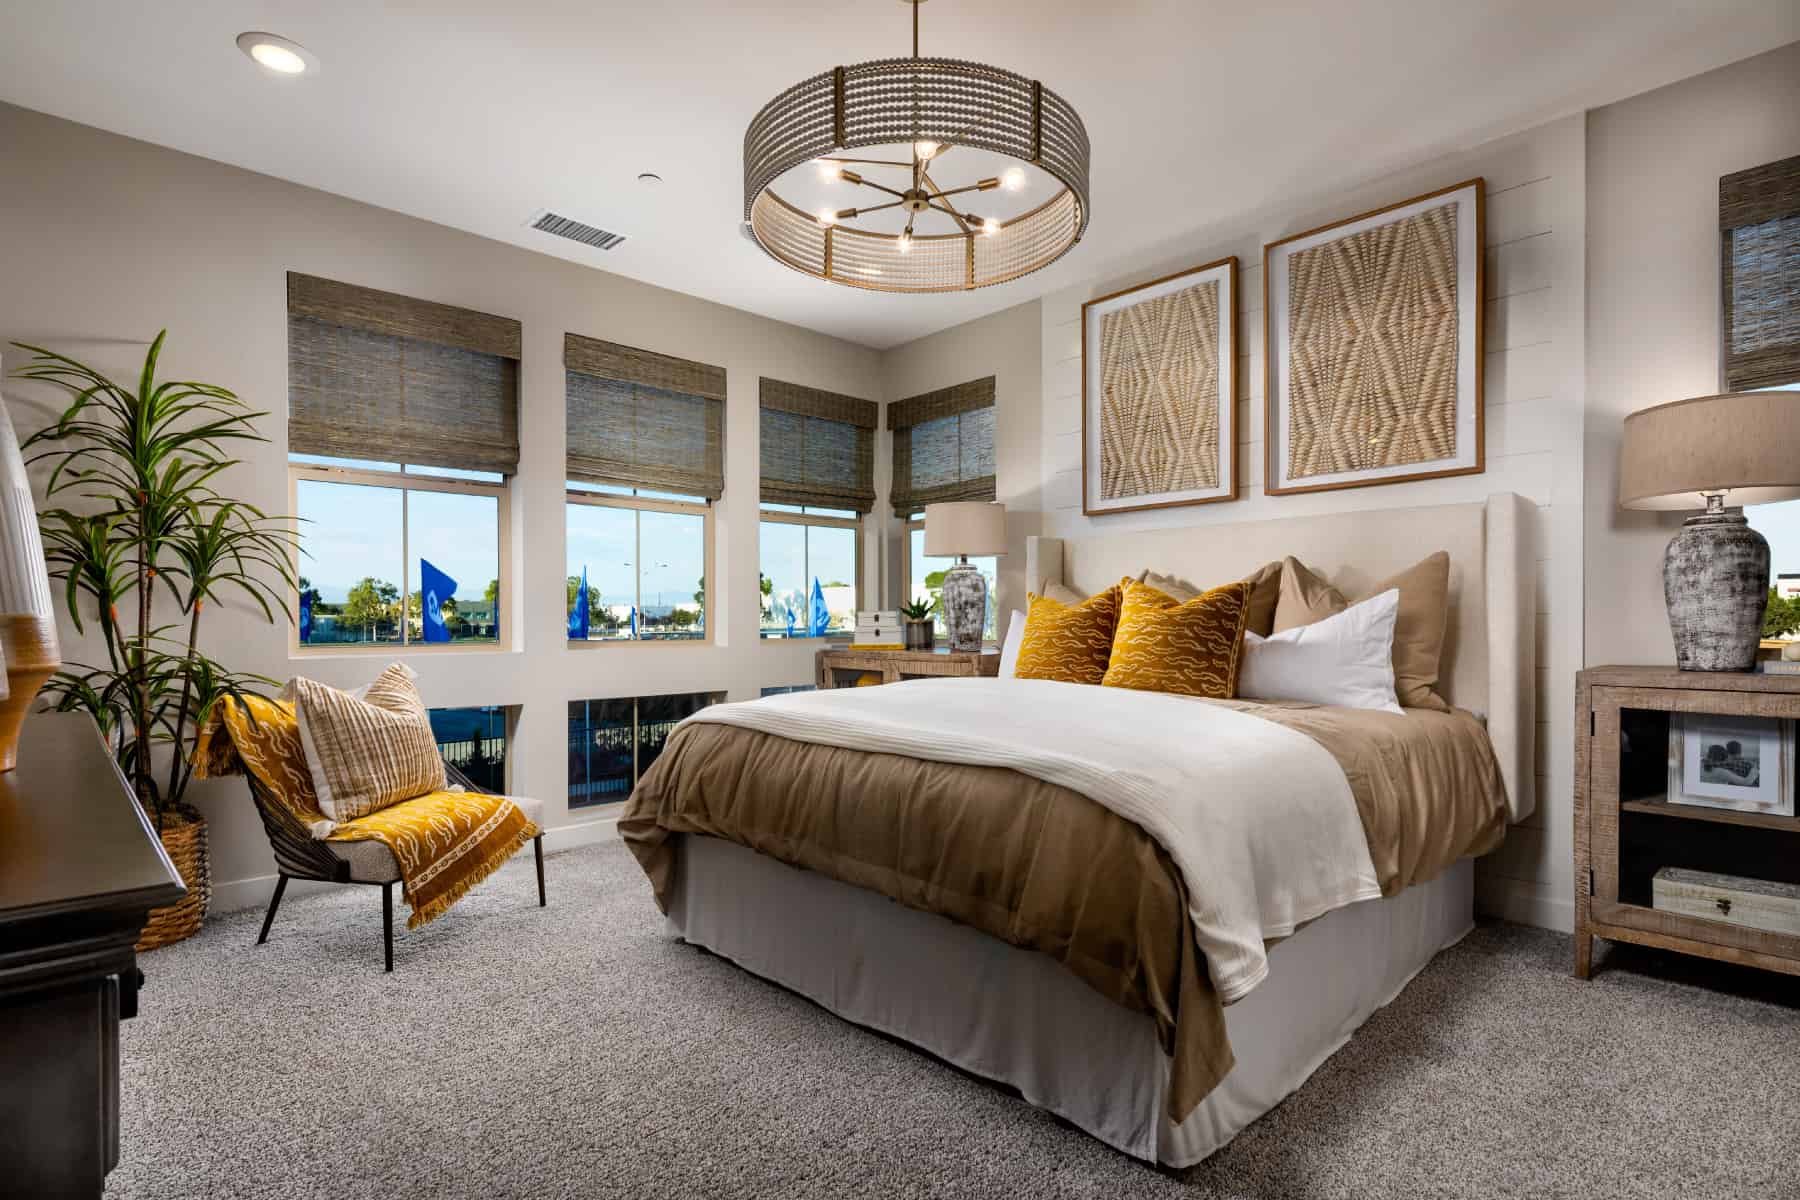 Primary Bedroom at Plan 4 of Belmont by Melia Homes in Cypress, CA